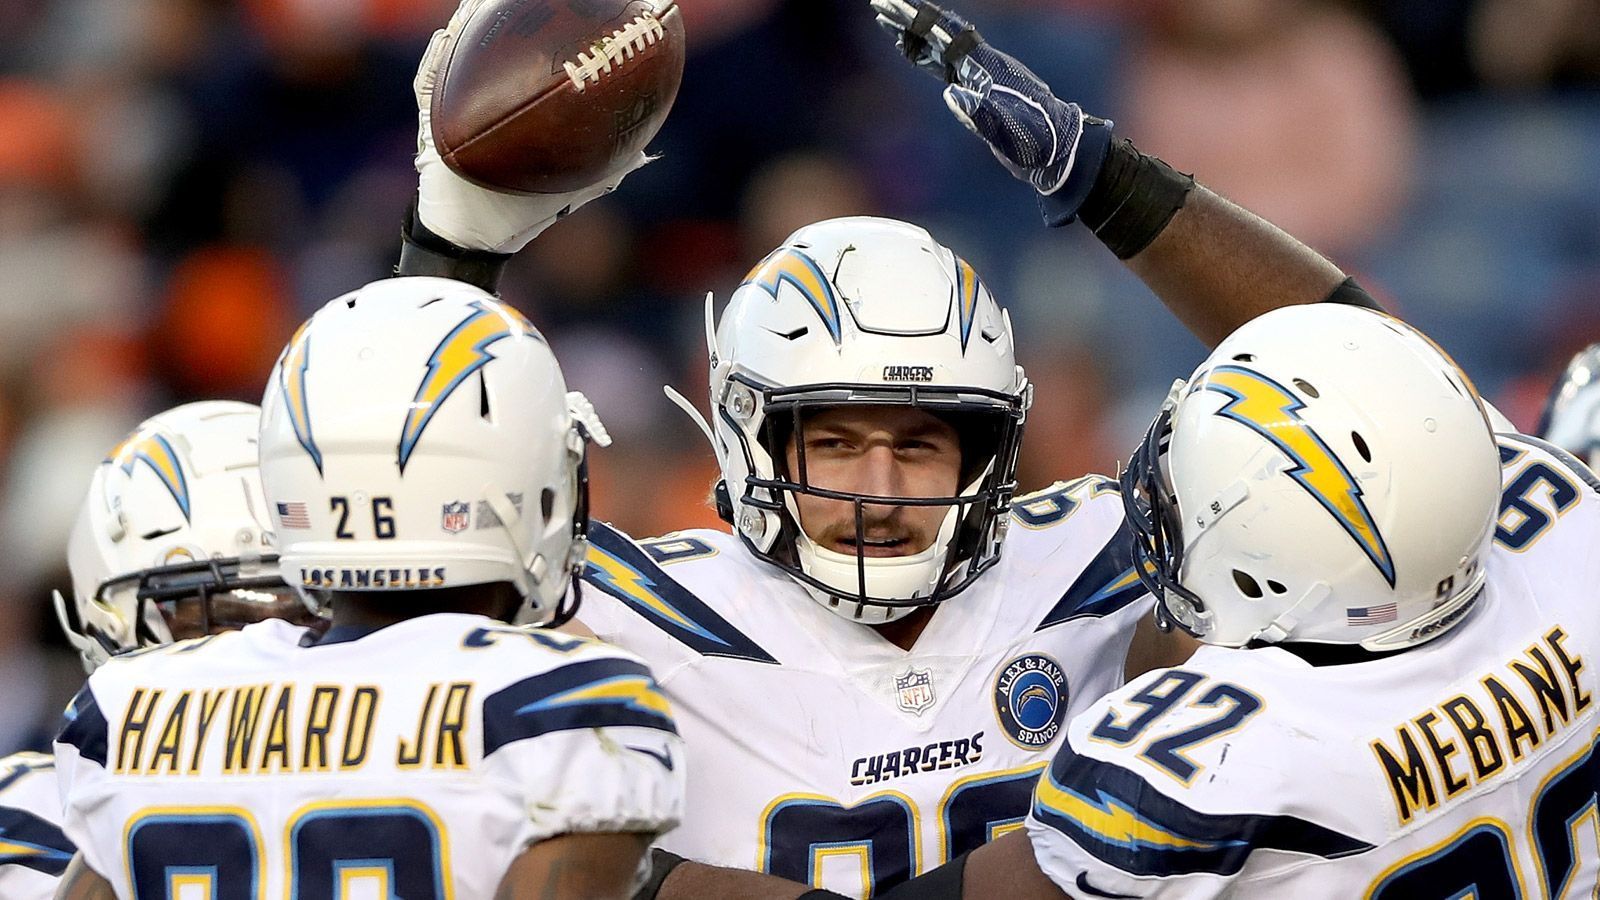 
                <strong>Los Angeles Chargers</strong><br>
                1. Spieltag: vs. Indianapolis2. Spieltag: at Detroit3. Spieltag: vs. Houston4. Spieltag: at Miami5. Spieltag: vs. Denver6. Spieltag: vs. Pittsburgh7. Spieltag: at Tennessee8. Spieltag: at Chicago9. Spieltag: vs. Green Bay10. Spieltag: at Oakland11. Spieltag: vs. Kansas City12. Spieltag: BYE 13. Spieltag: vs. at Denver14. Spieltag: at Jacksonville15. Spieltag: vs. Minnesota16. Spieltag: vs. Oakland17. Spieltag: at Kansas City
              